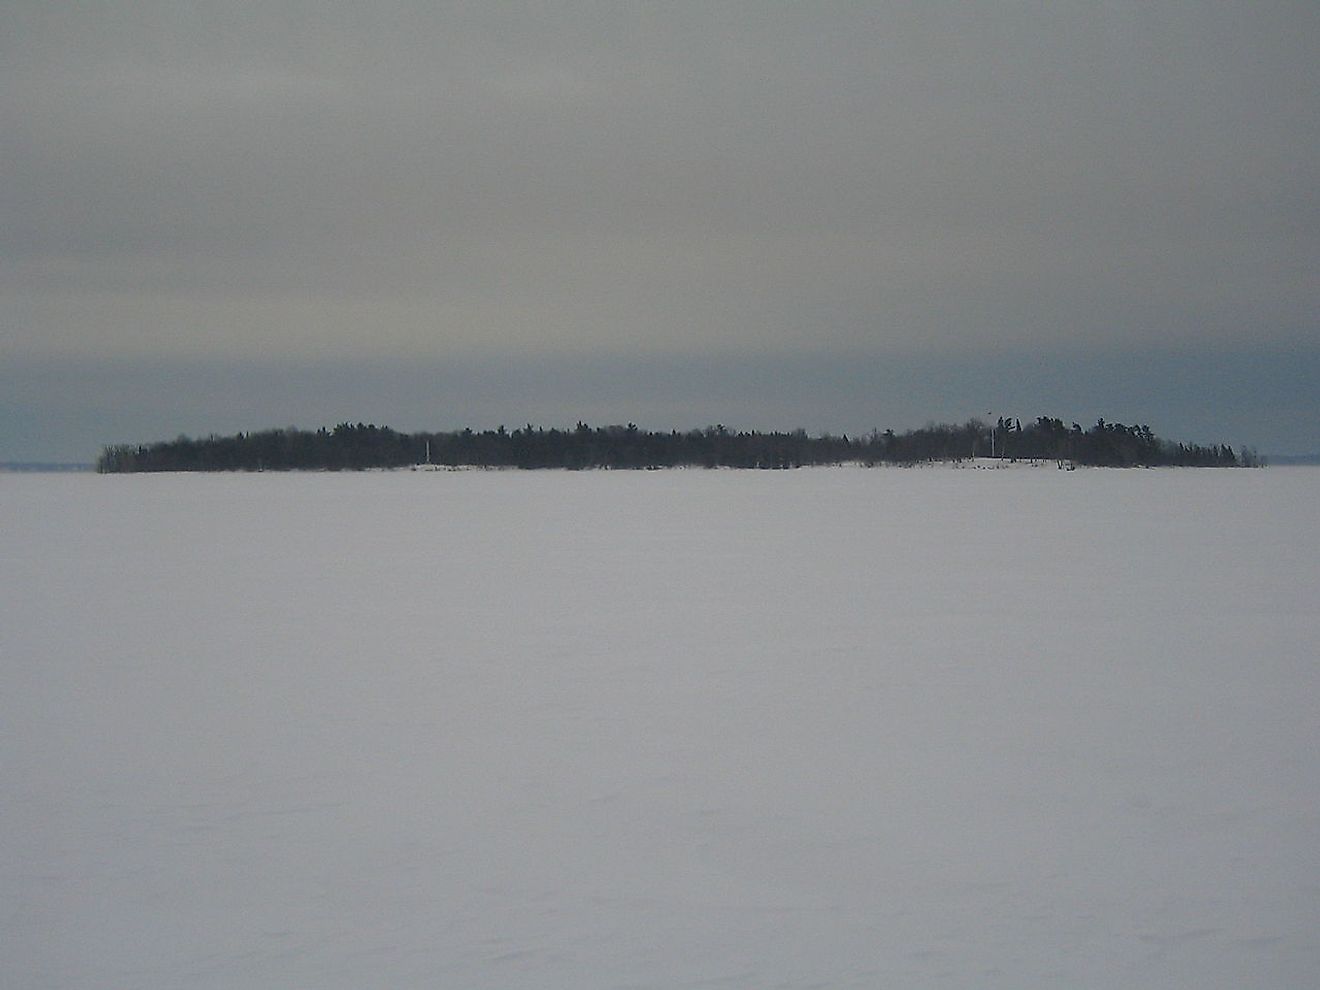 Crab Island as seen from the frozen ice of Lake Champlain in January 2009. The island's monument and flagpole can be seen in the enlargement to the left and right respectively. Image credit: M. Boire/Public domain